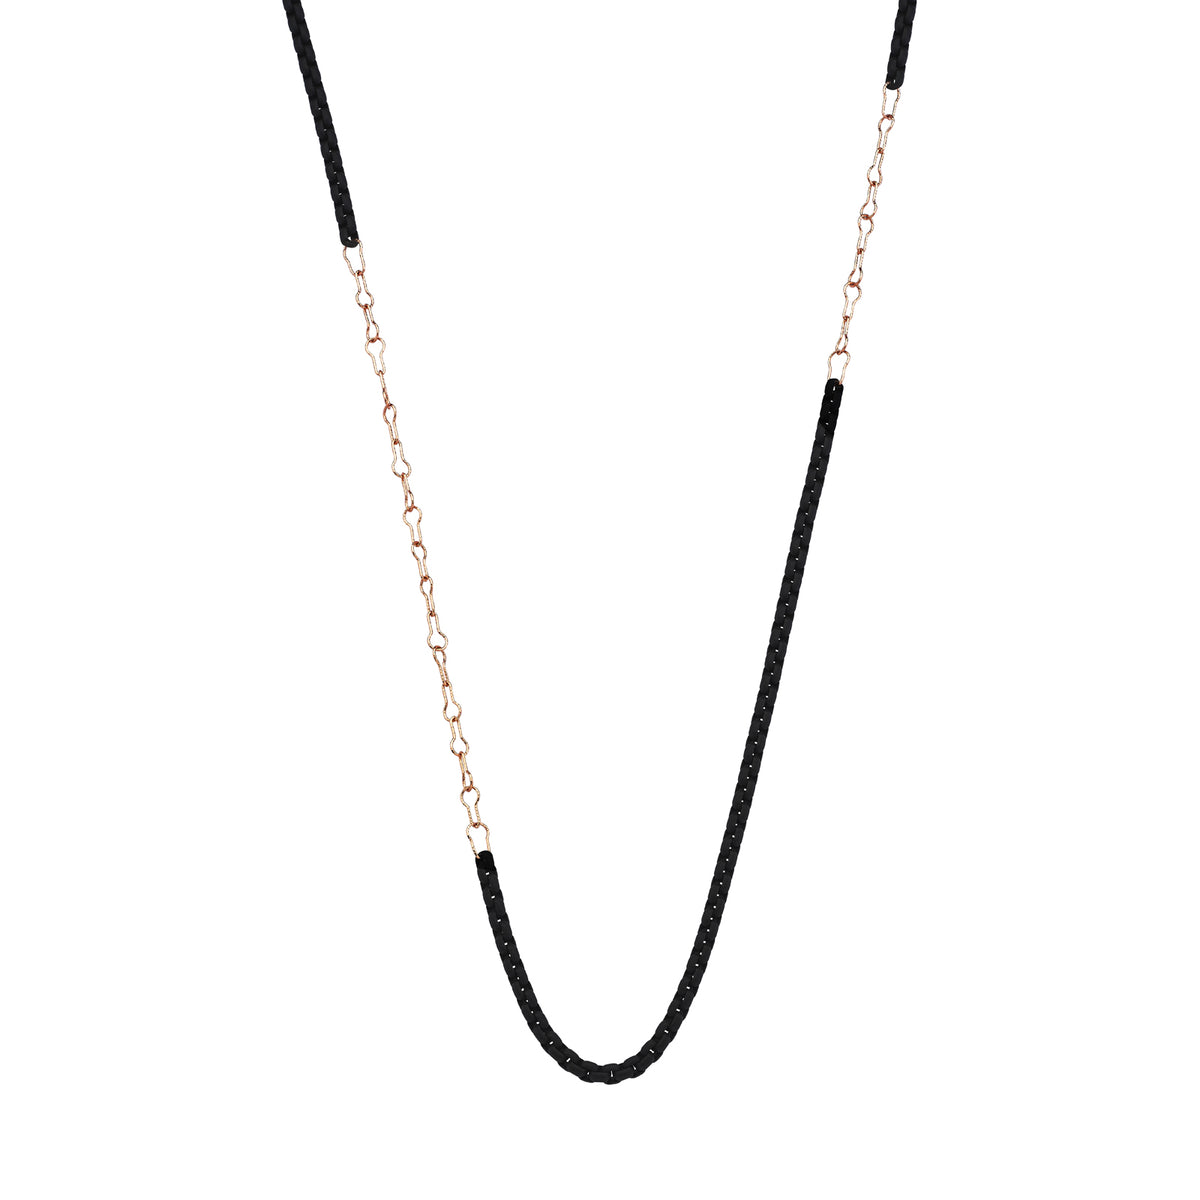 Party Chain Black Fusion Necklace